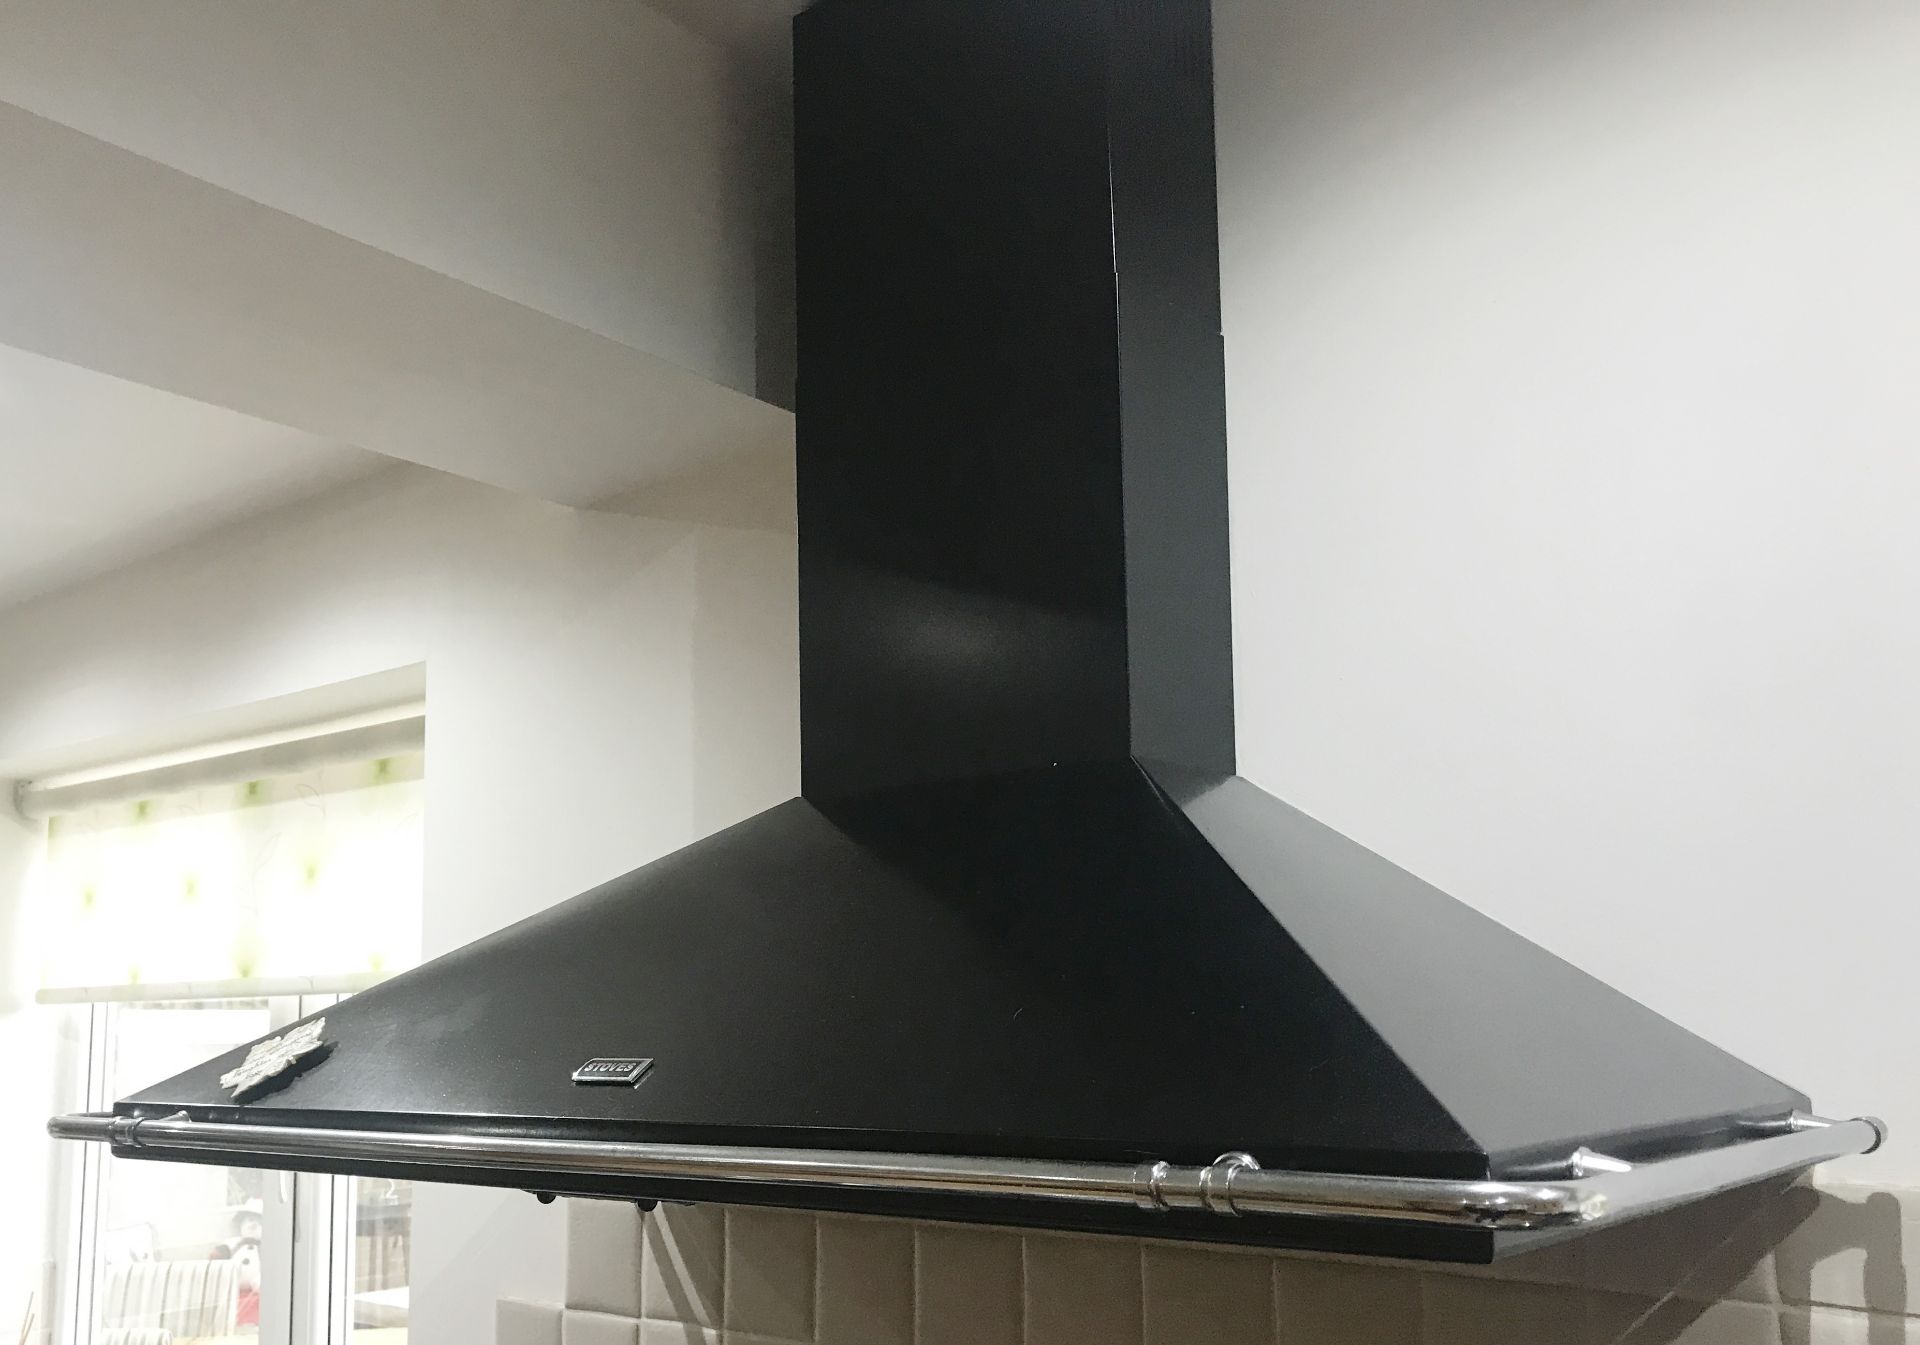 1 x Stoves Richmond 1100DF Dual Fuel Range Cooker With Matching Extractor Hood - Black Finish With 4 - Image 6 of 18